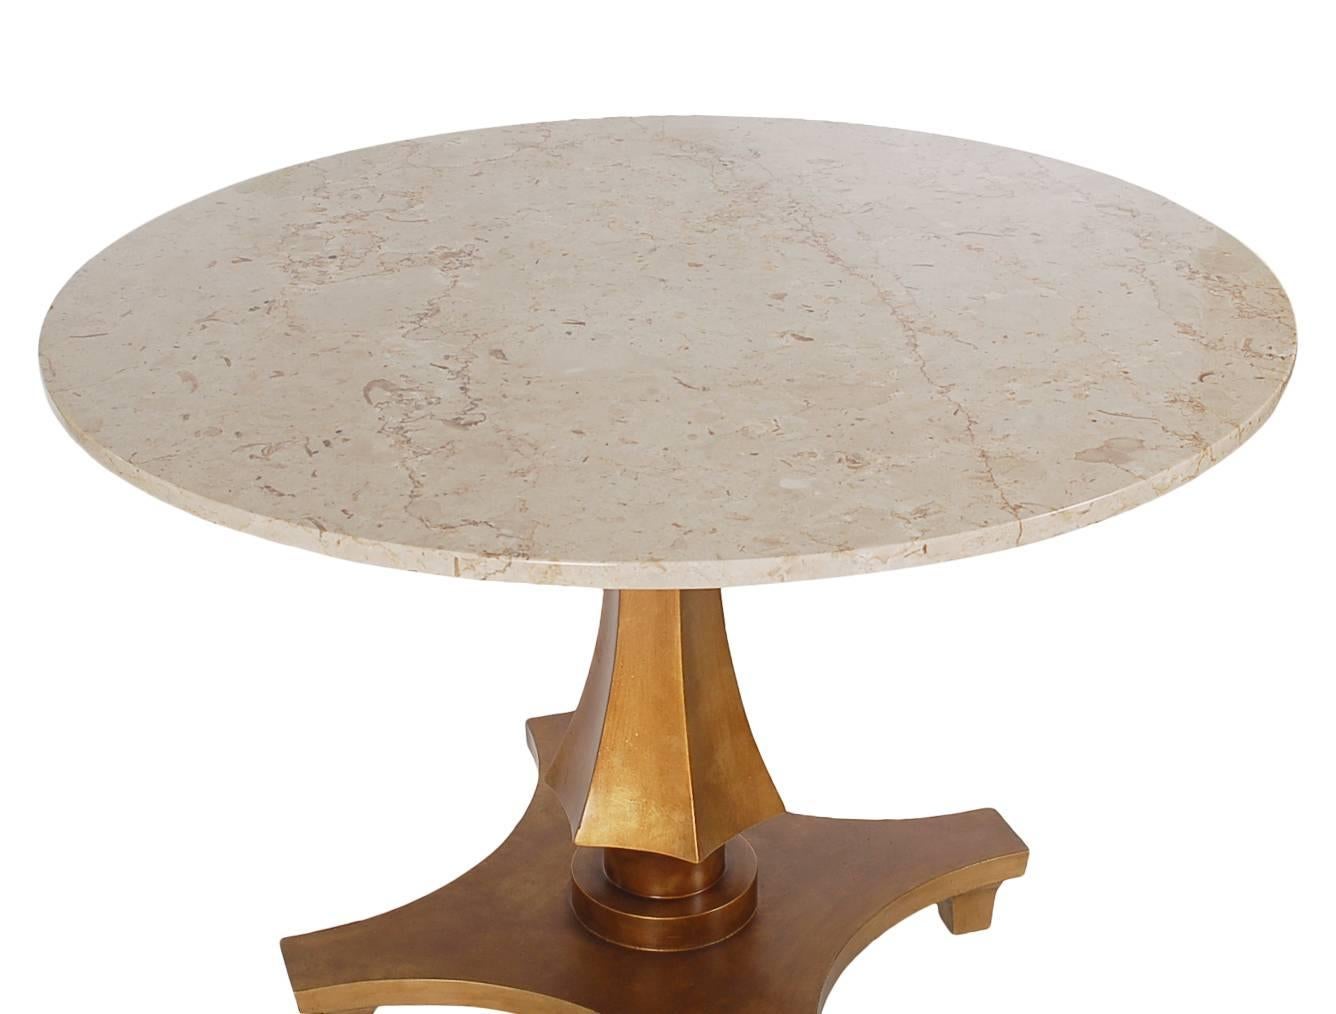 American Hollywood Regency Gold Gilded Marble Dining or Center Table by Baker Furniture